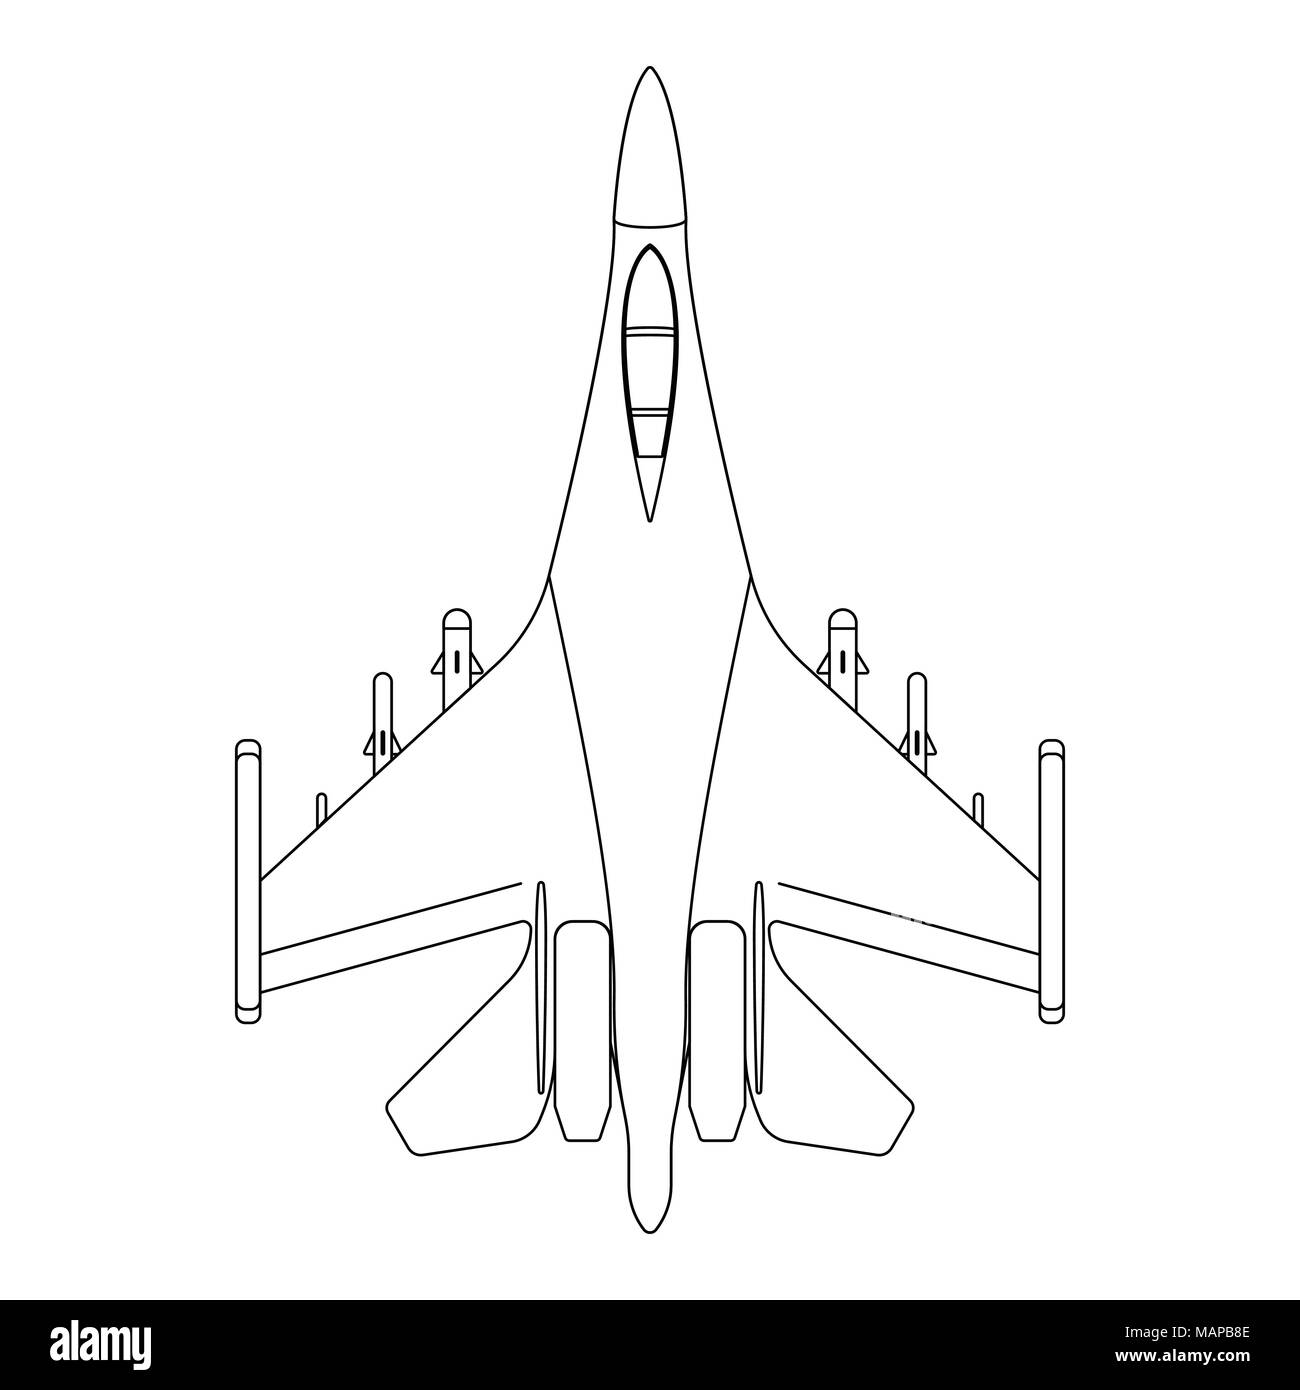 Fighter aircraft outline. Military equipment icon. Vector illustration. Stock Vector